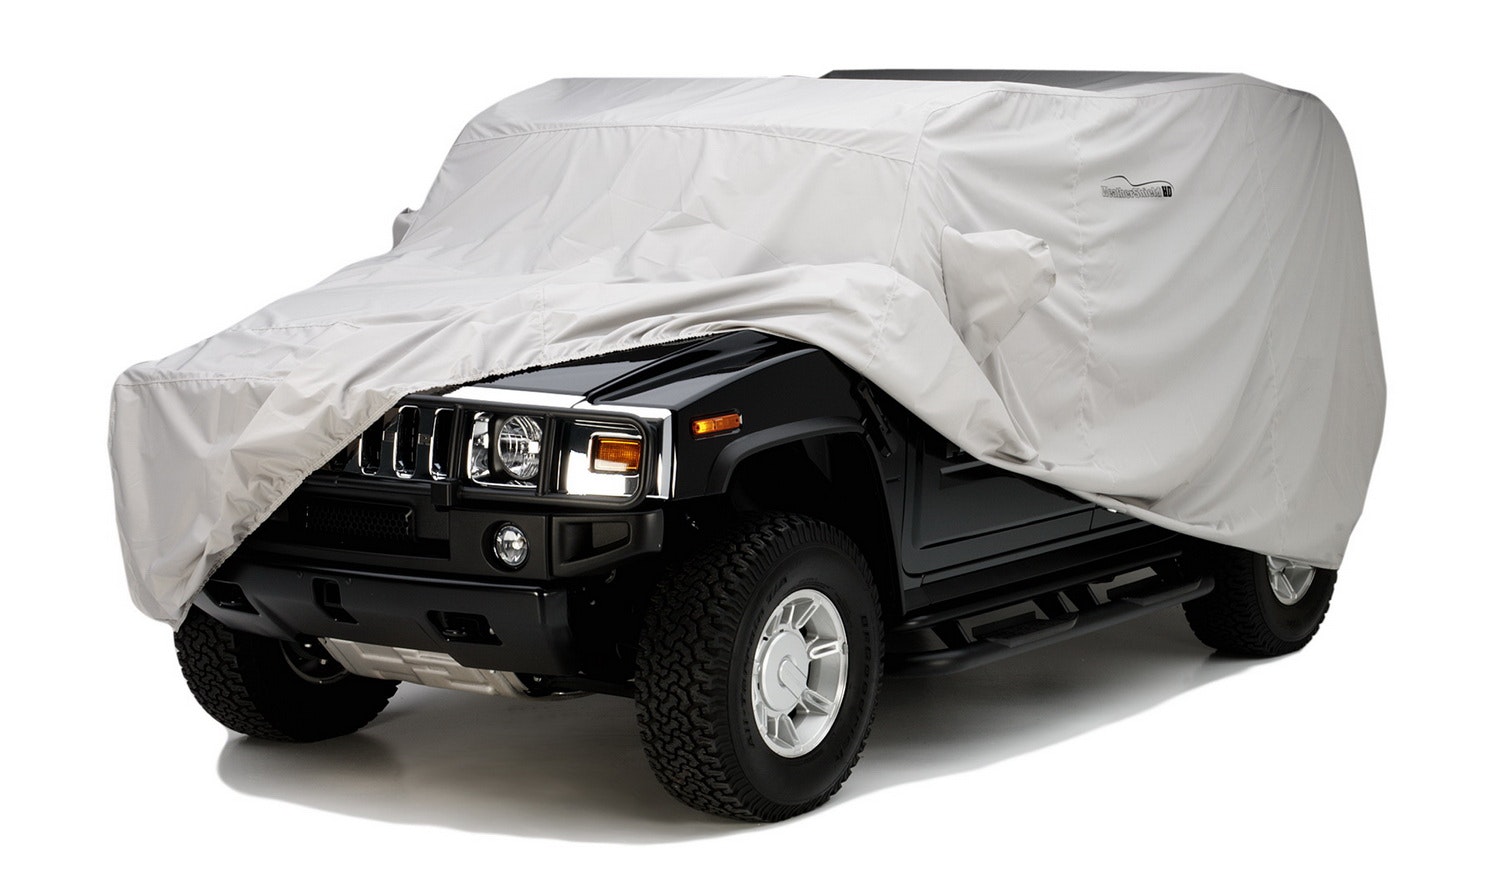 Covercraft Custom Fit WeatherShield HD Series Vehicle Cover, Gray - 1